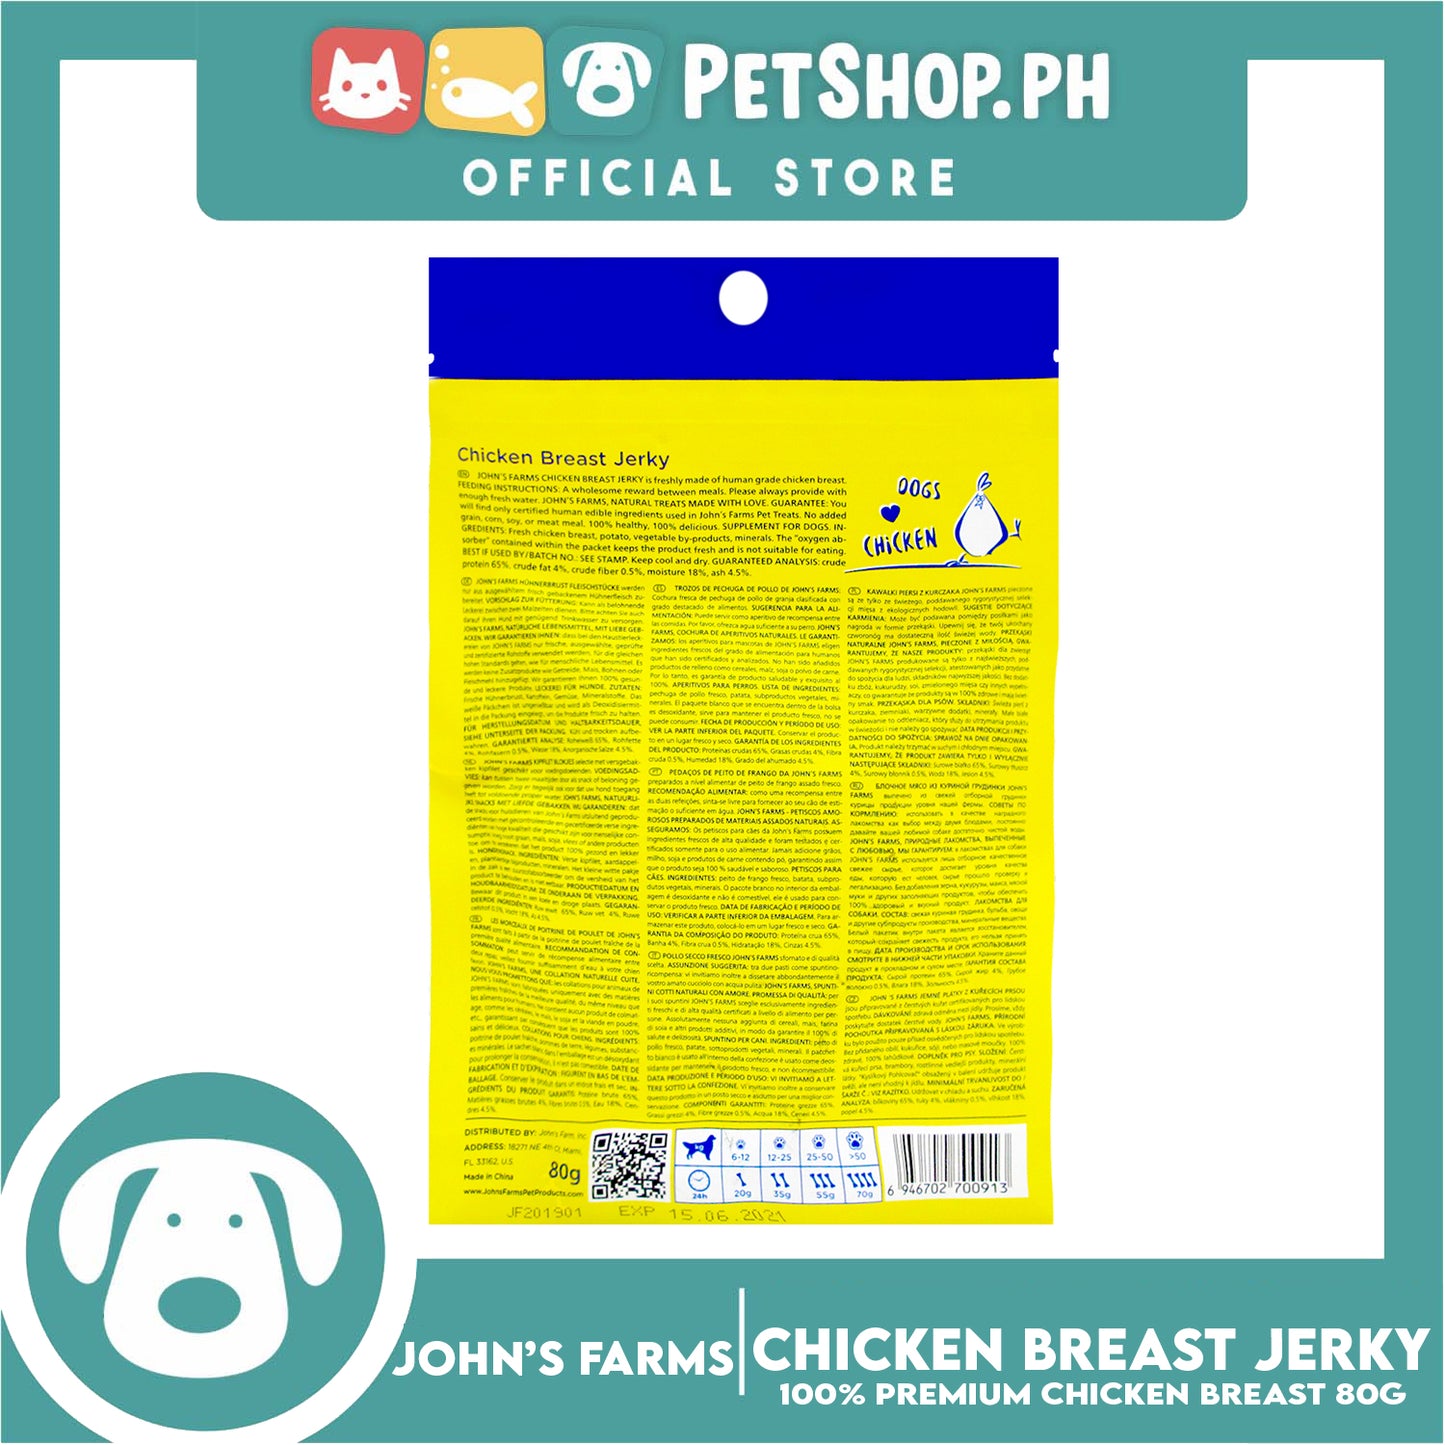 John's Farms Dog Food, High Protein For Dogs Of All Sizes, Resealable Zipper 80g (Chicken Breast Jerky) Dog Treats